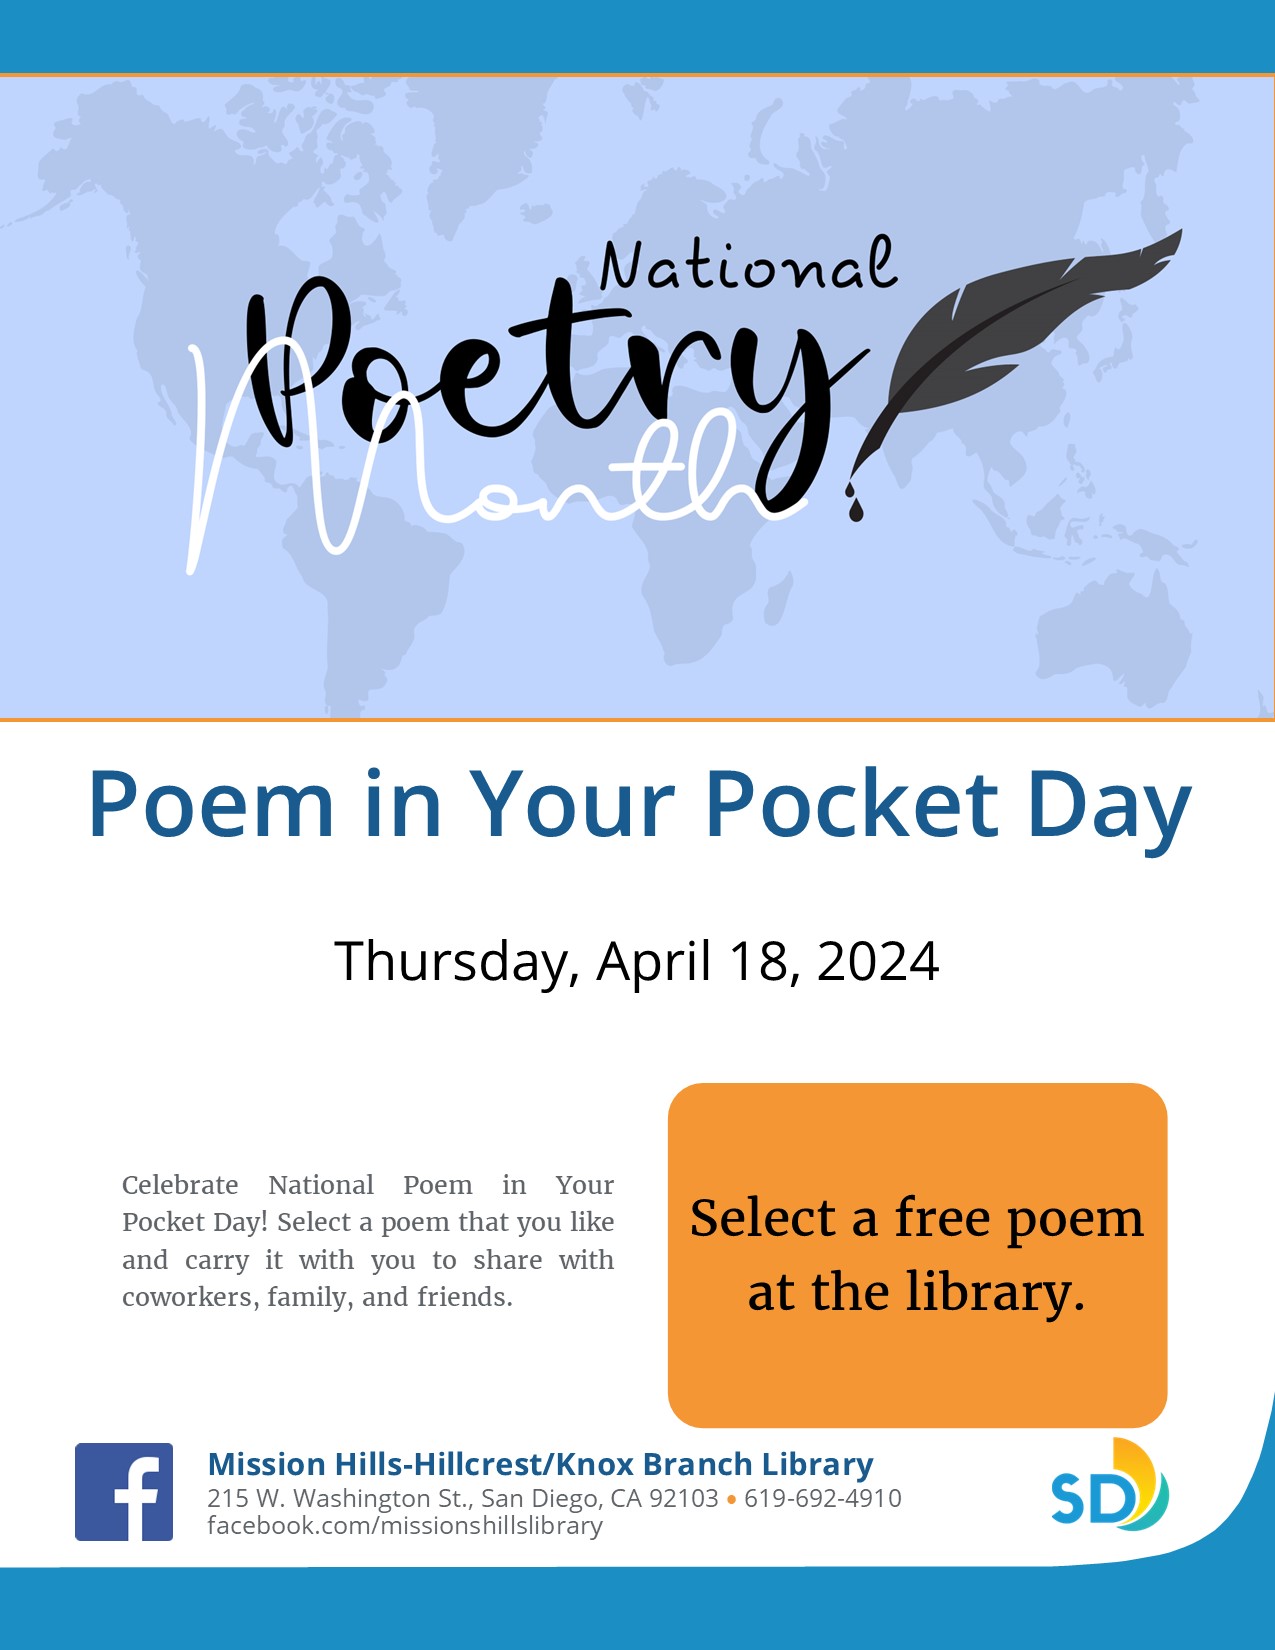 Flyer with details of Poem in Your Pocket Day